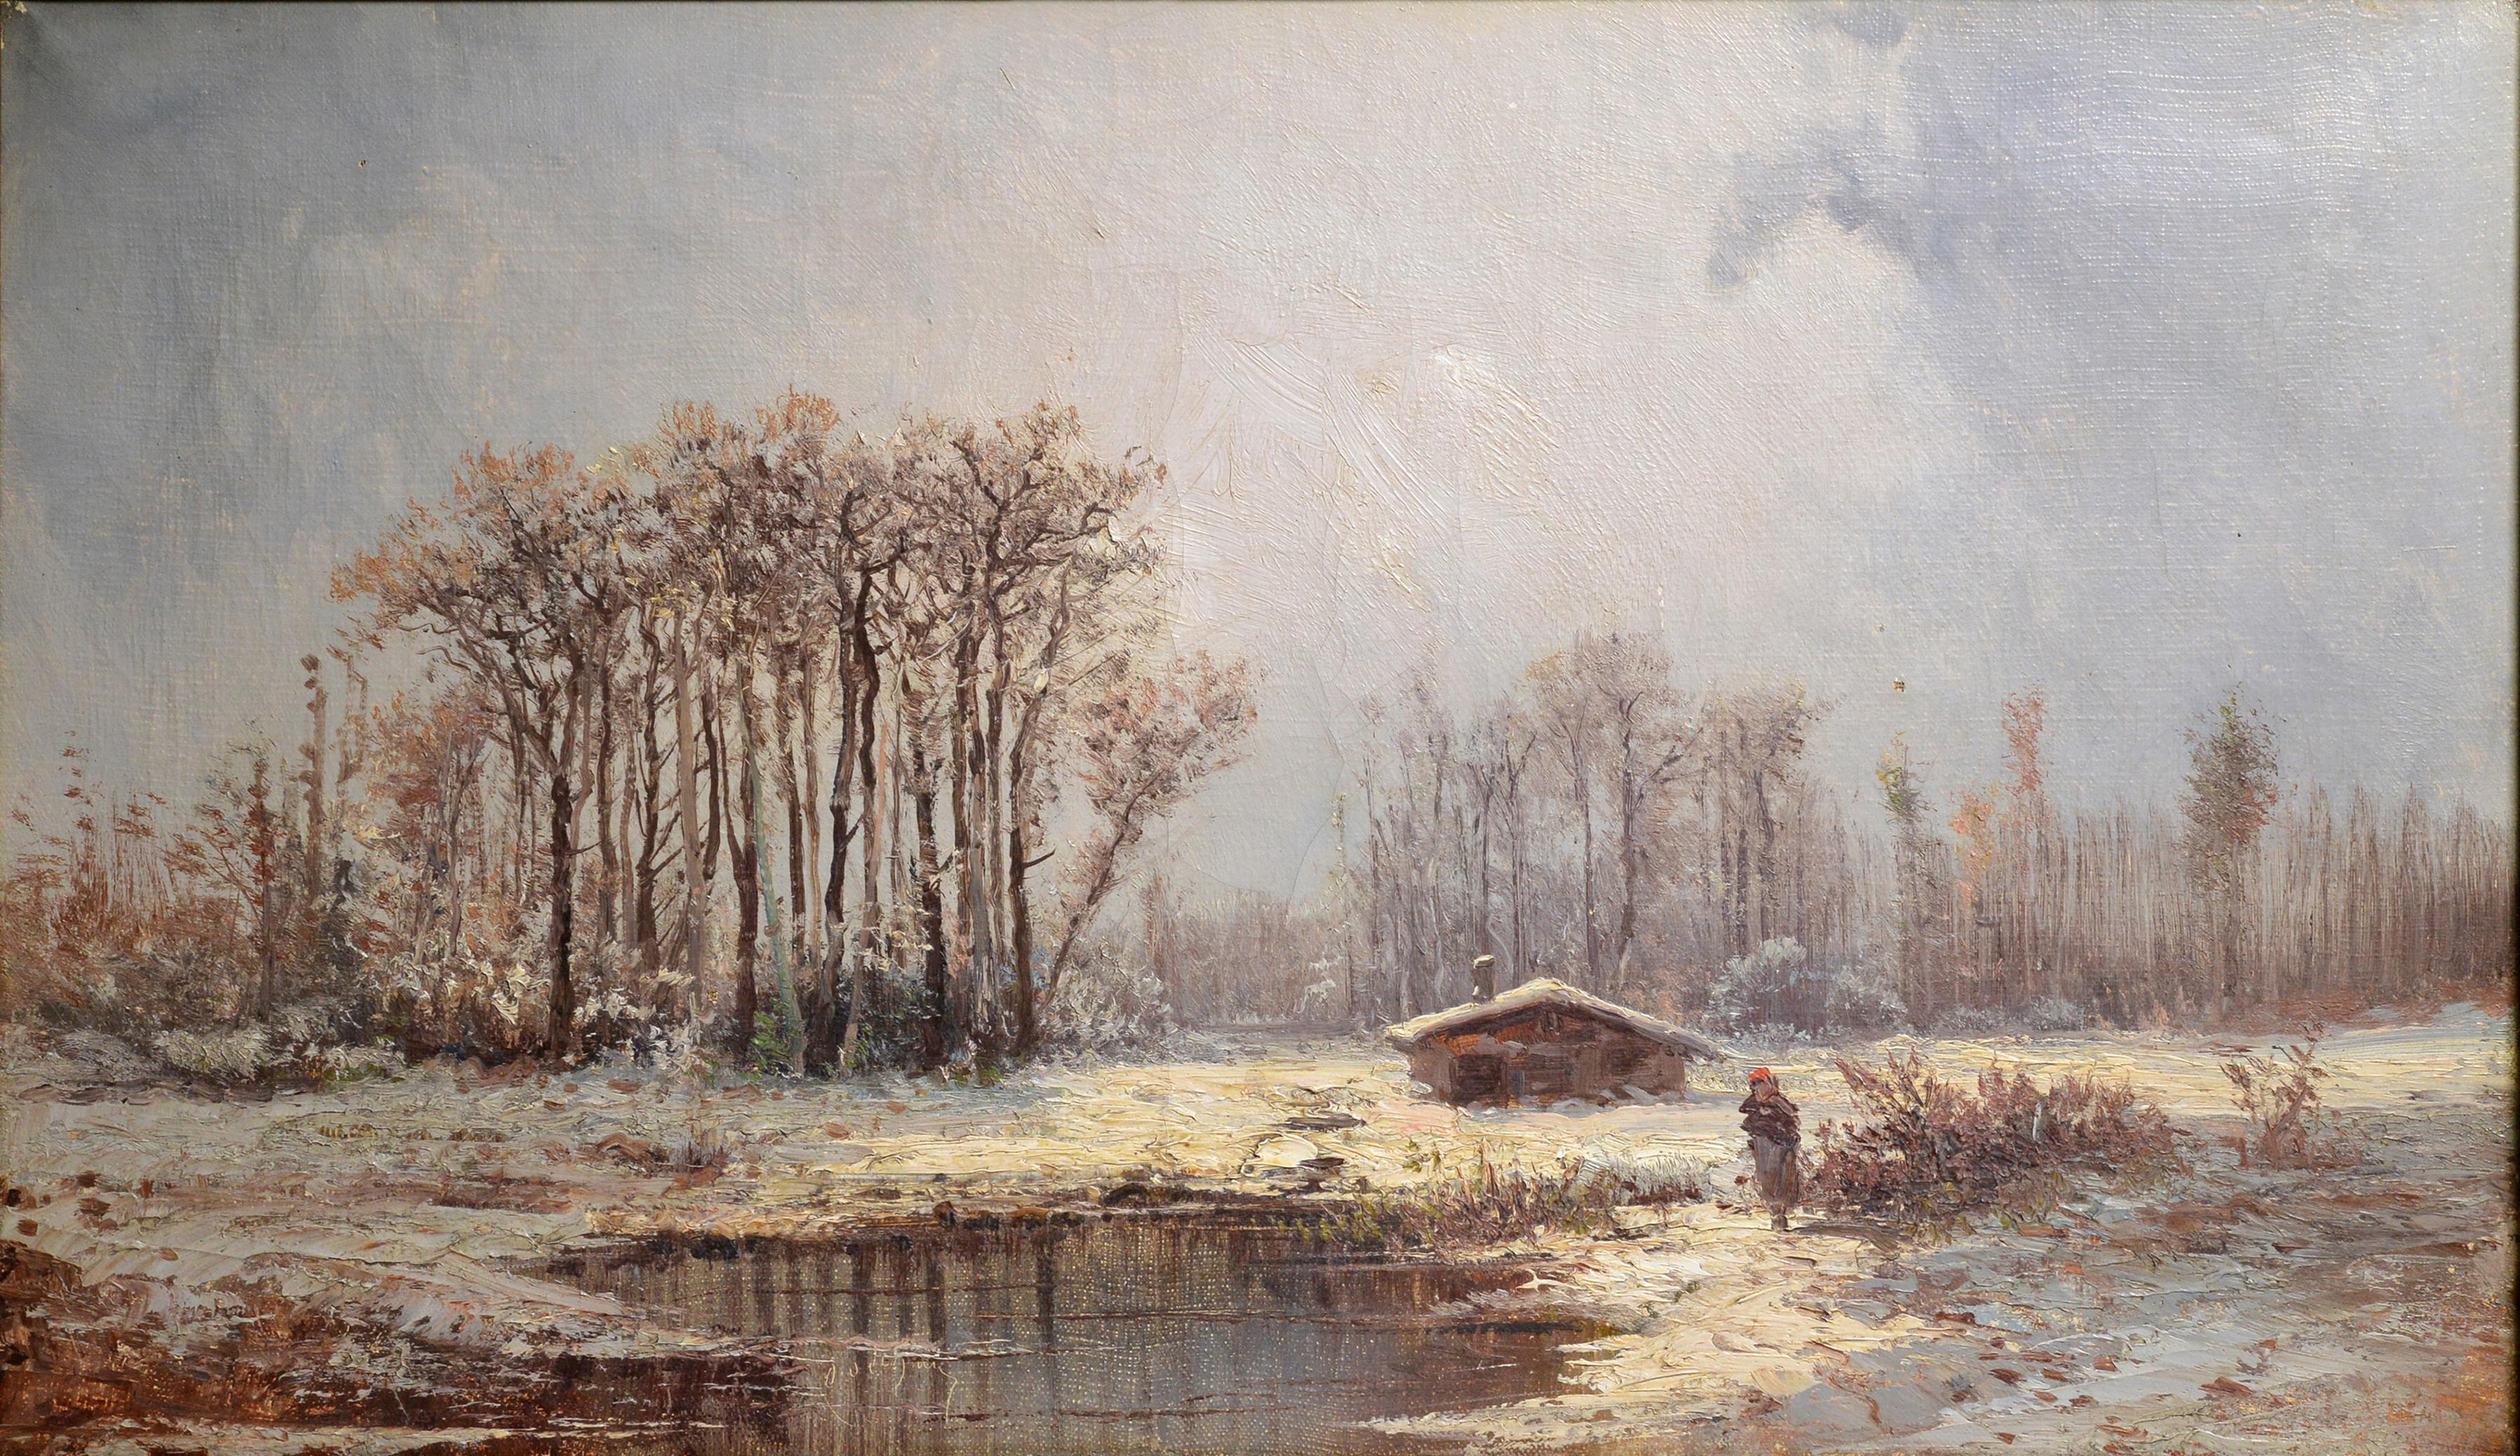 Spring Thaw Barbizon Landscape 19th century Oil painting by French Impressionist - Painting by Emile Godchaux